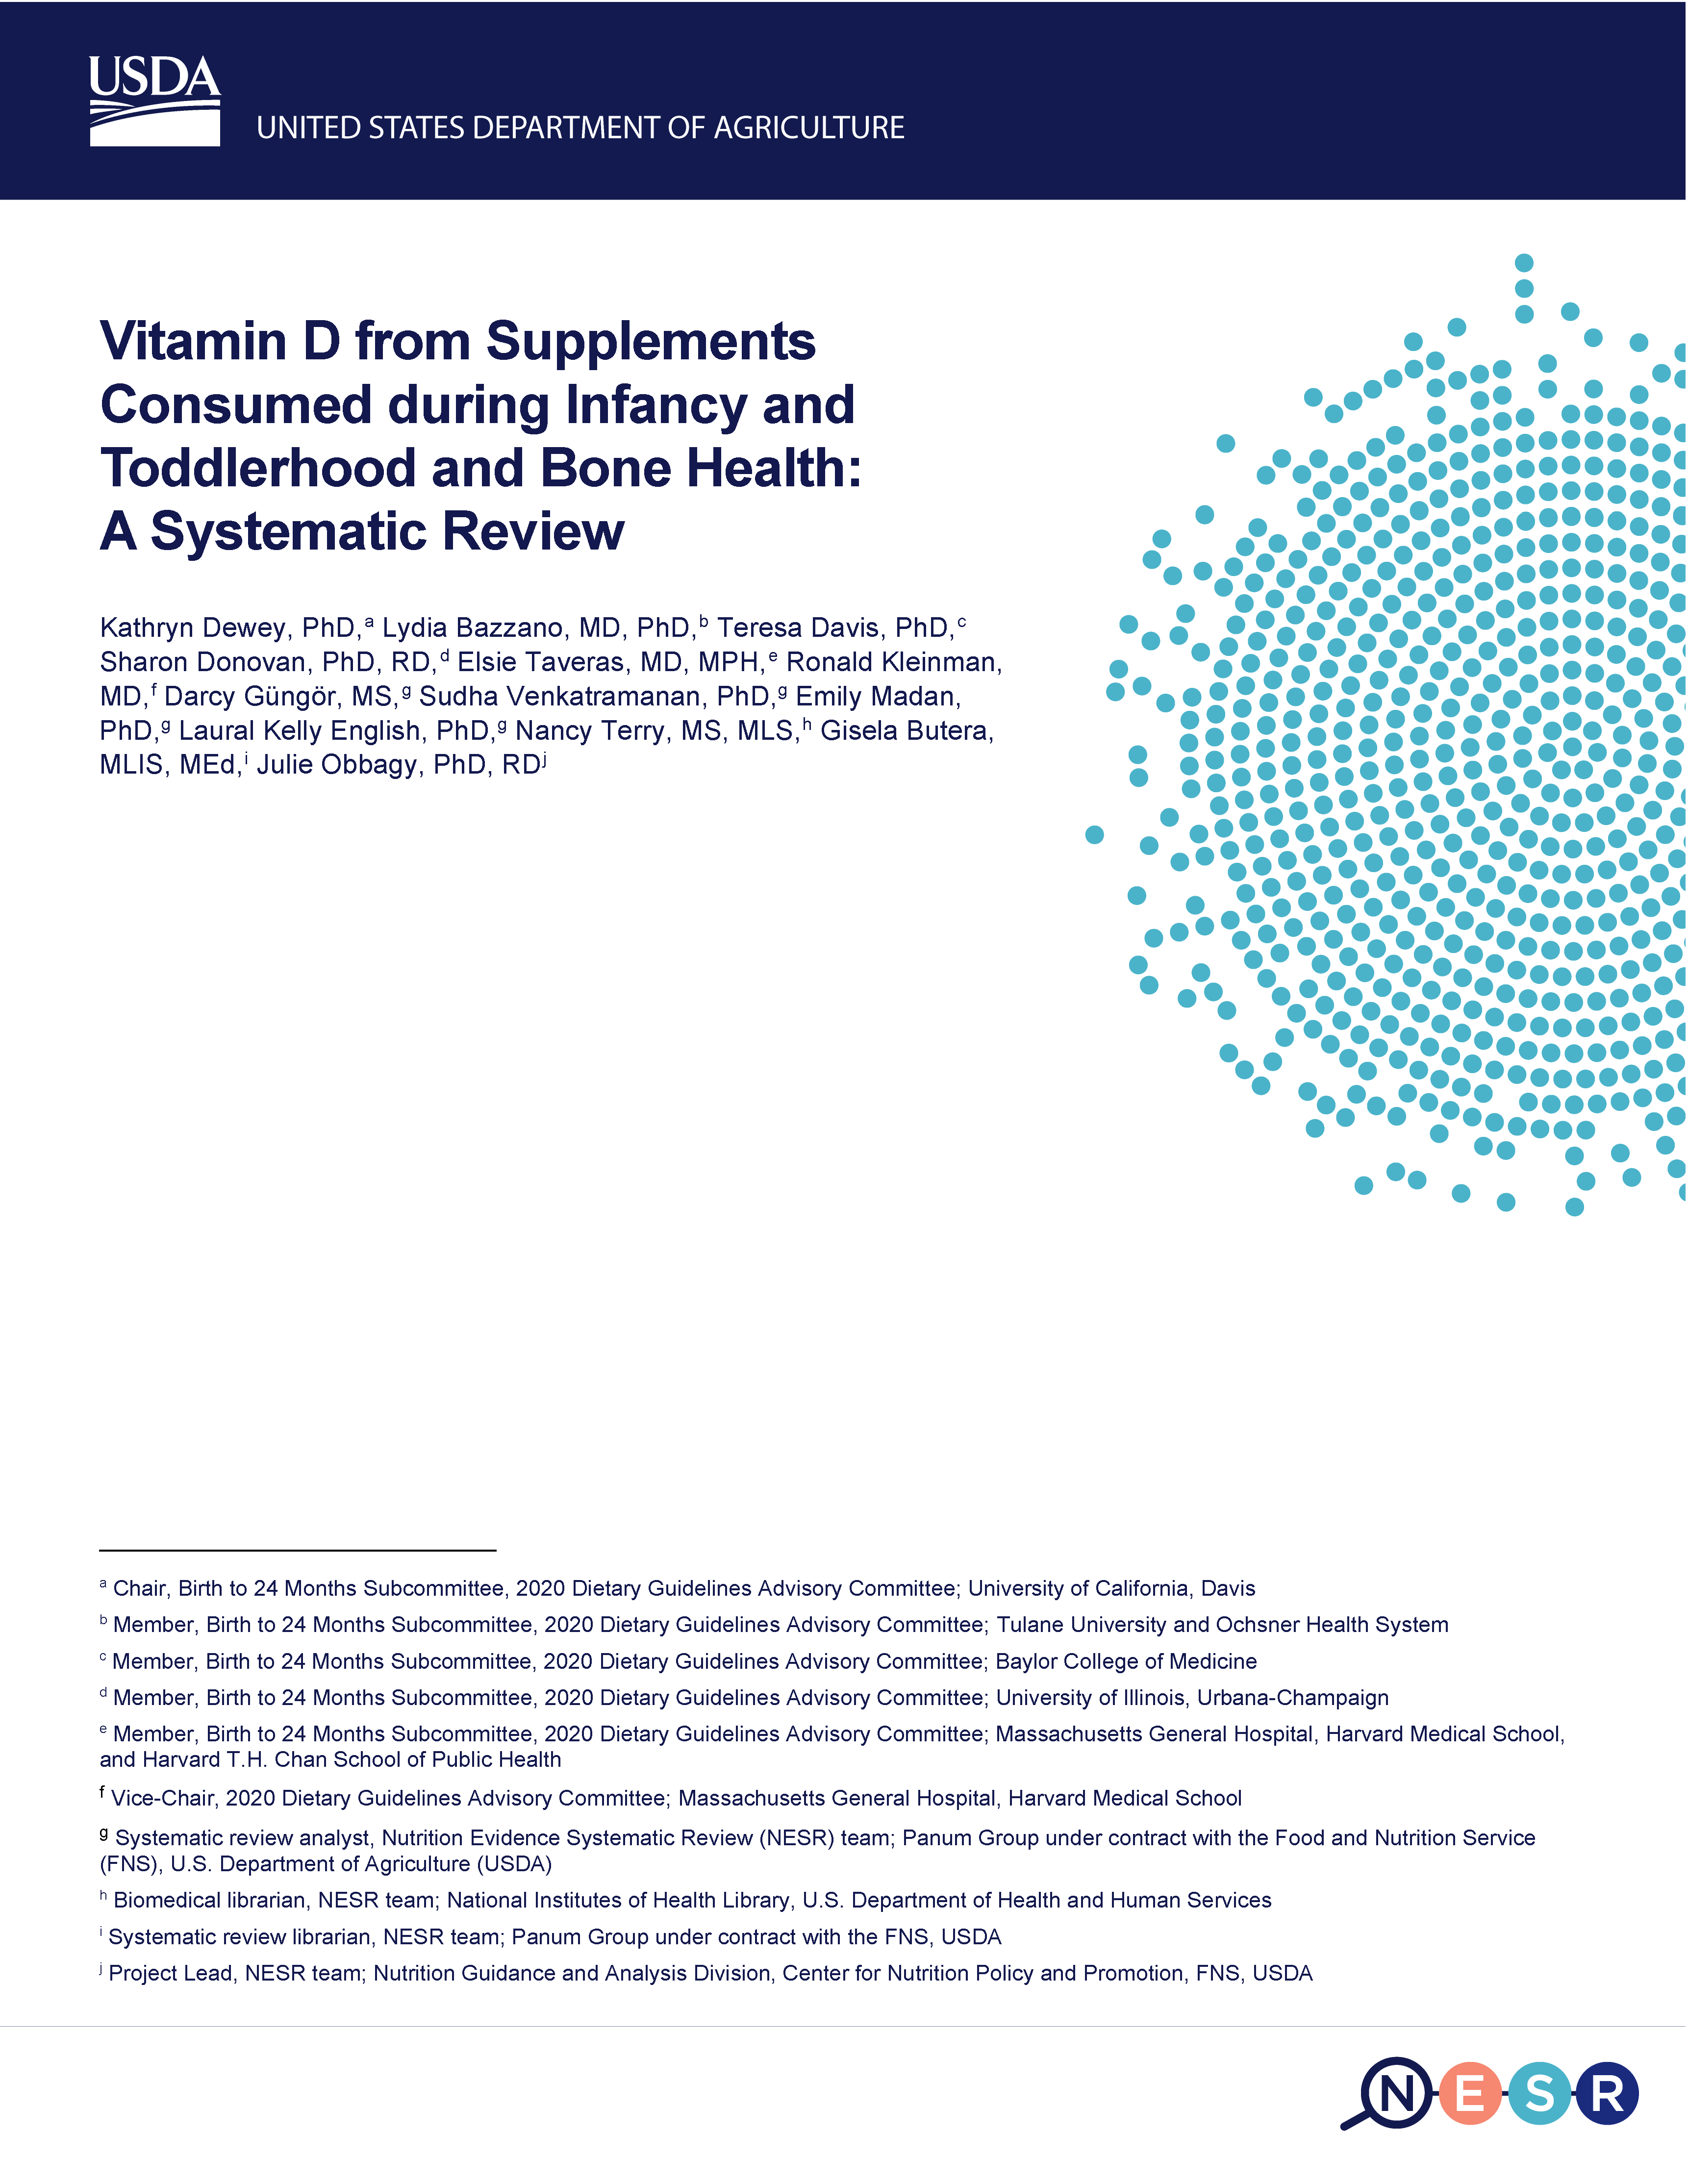 Cover of vitamin D from supplements consumed during infancy and toddlerhood and bone health report